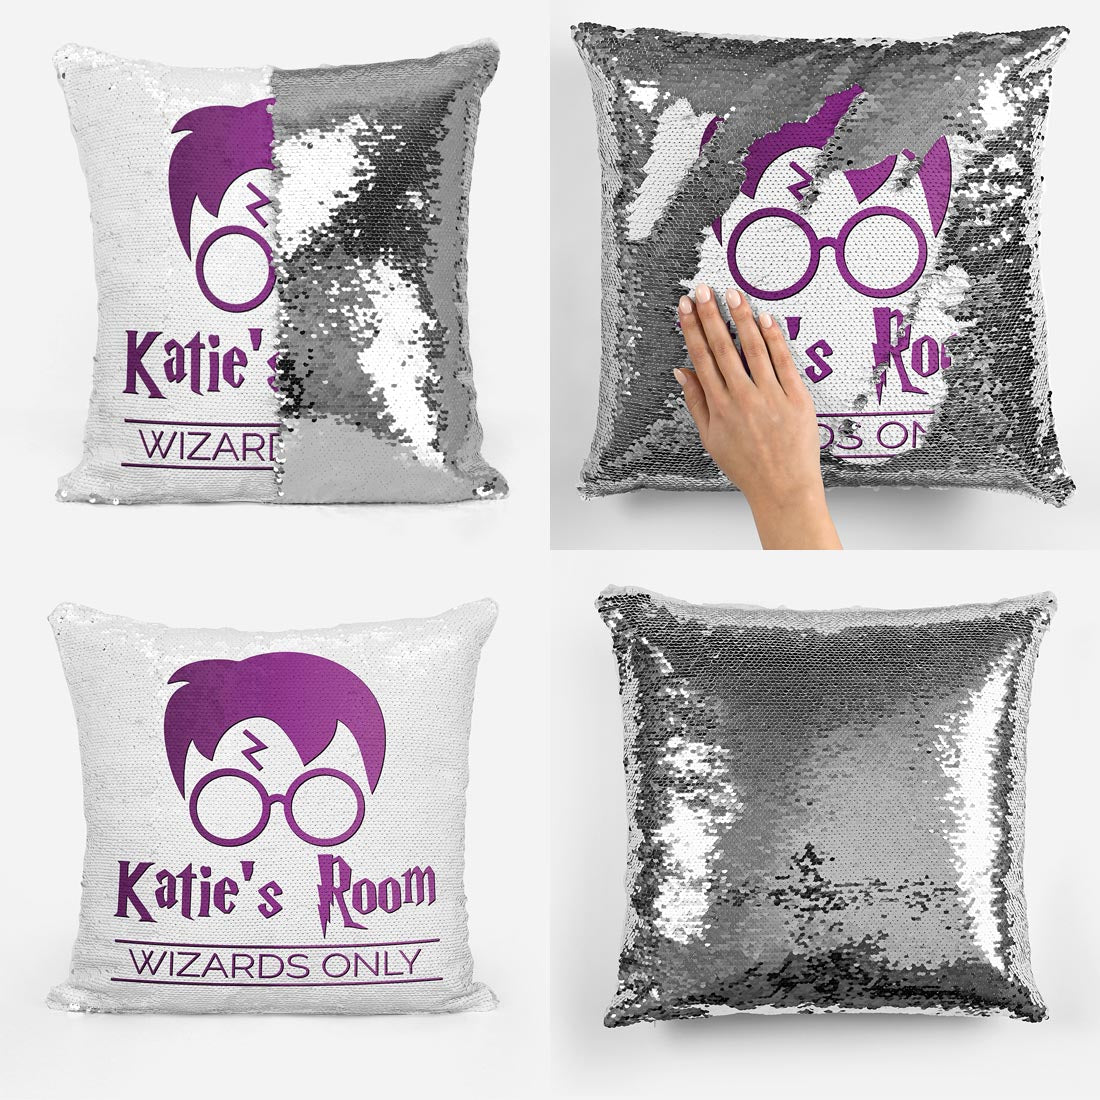 Personalised Wizards Only - Reveal Pillow Cushion